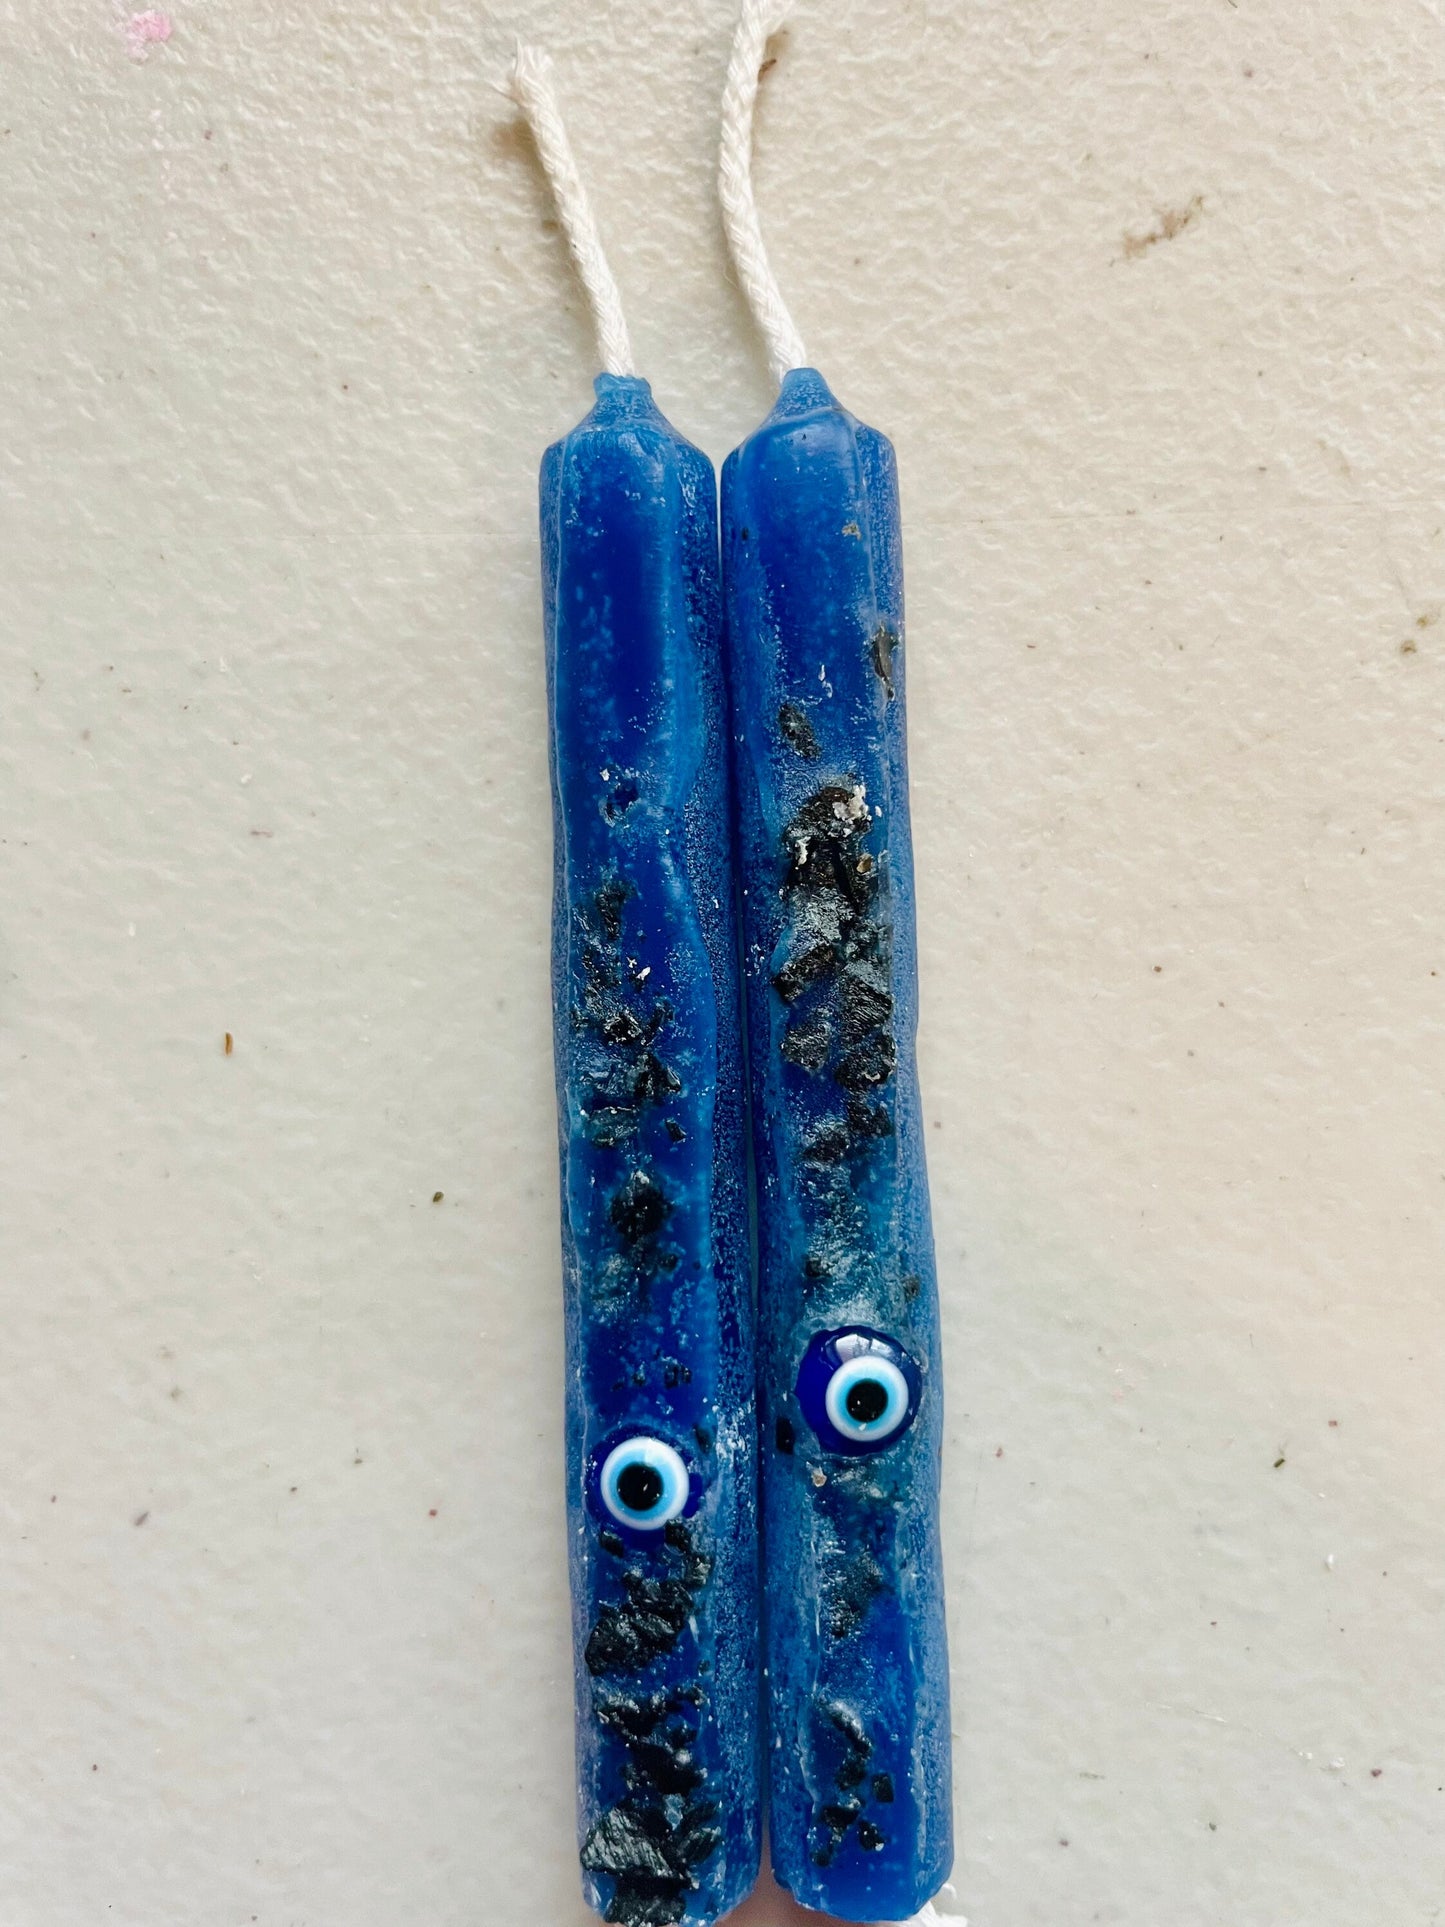 Set of 2 Evil Eye Removal Dressed Chime Spell Candles, Evil Eye Charm + Black Witch Protection Salt